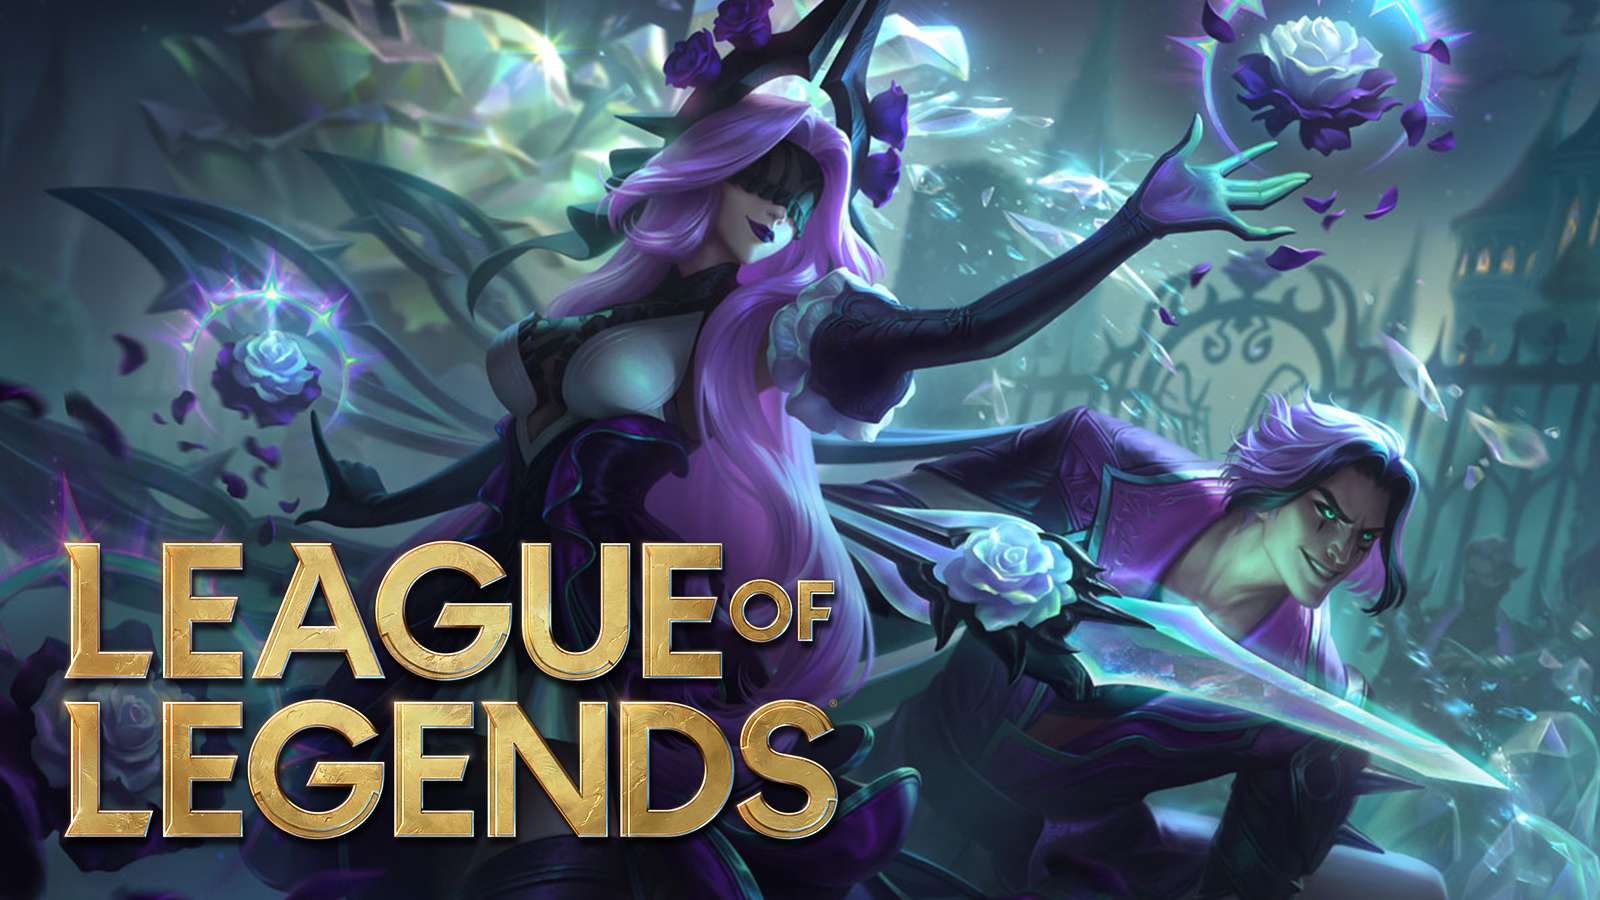 Syndra and Talon "Twisted Rose" skins next to League of Legends patch 11.3.